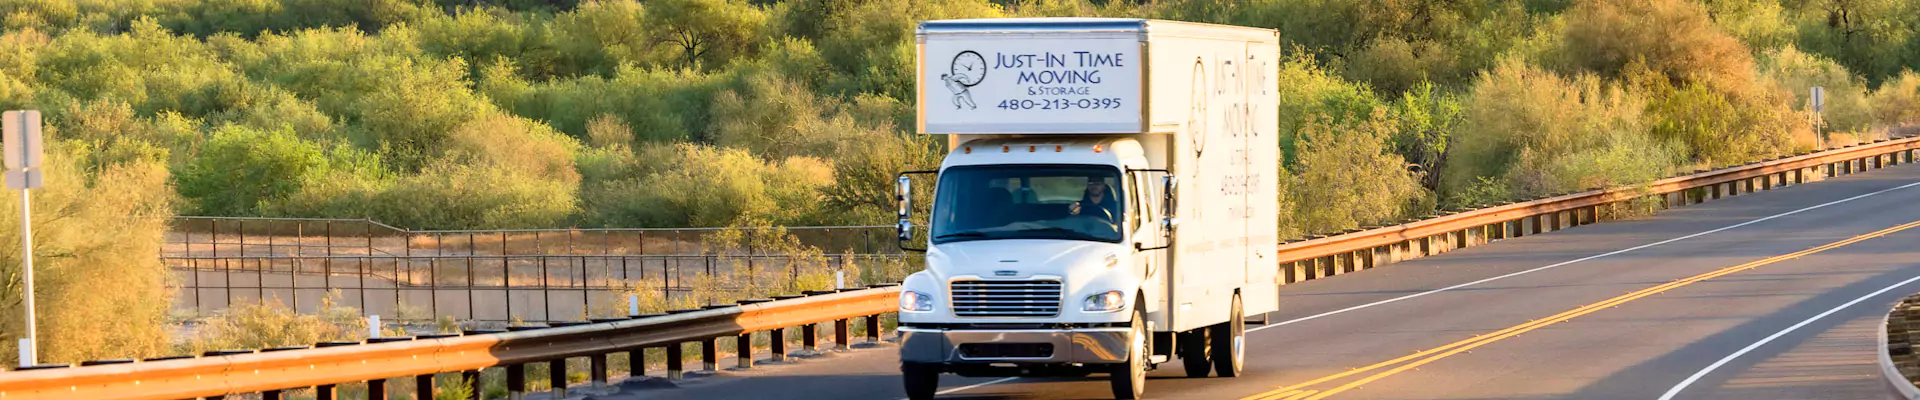 Interested in Our Mover Jobs - Just-in Time Moving and Storage